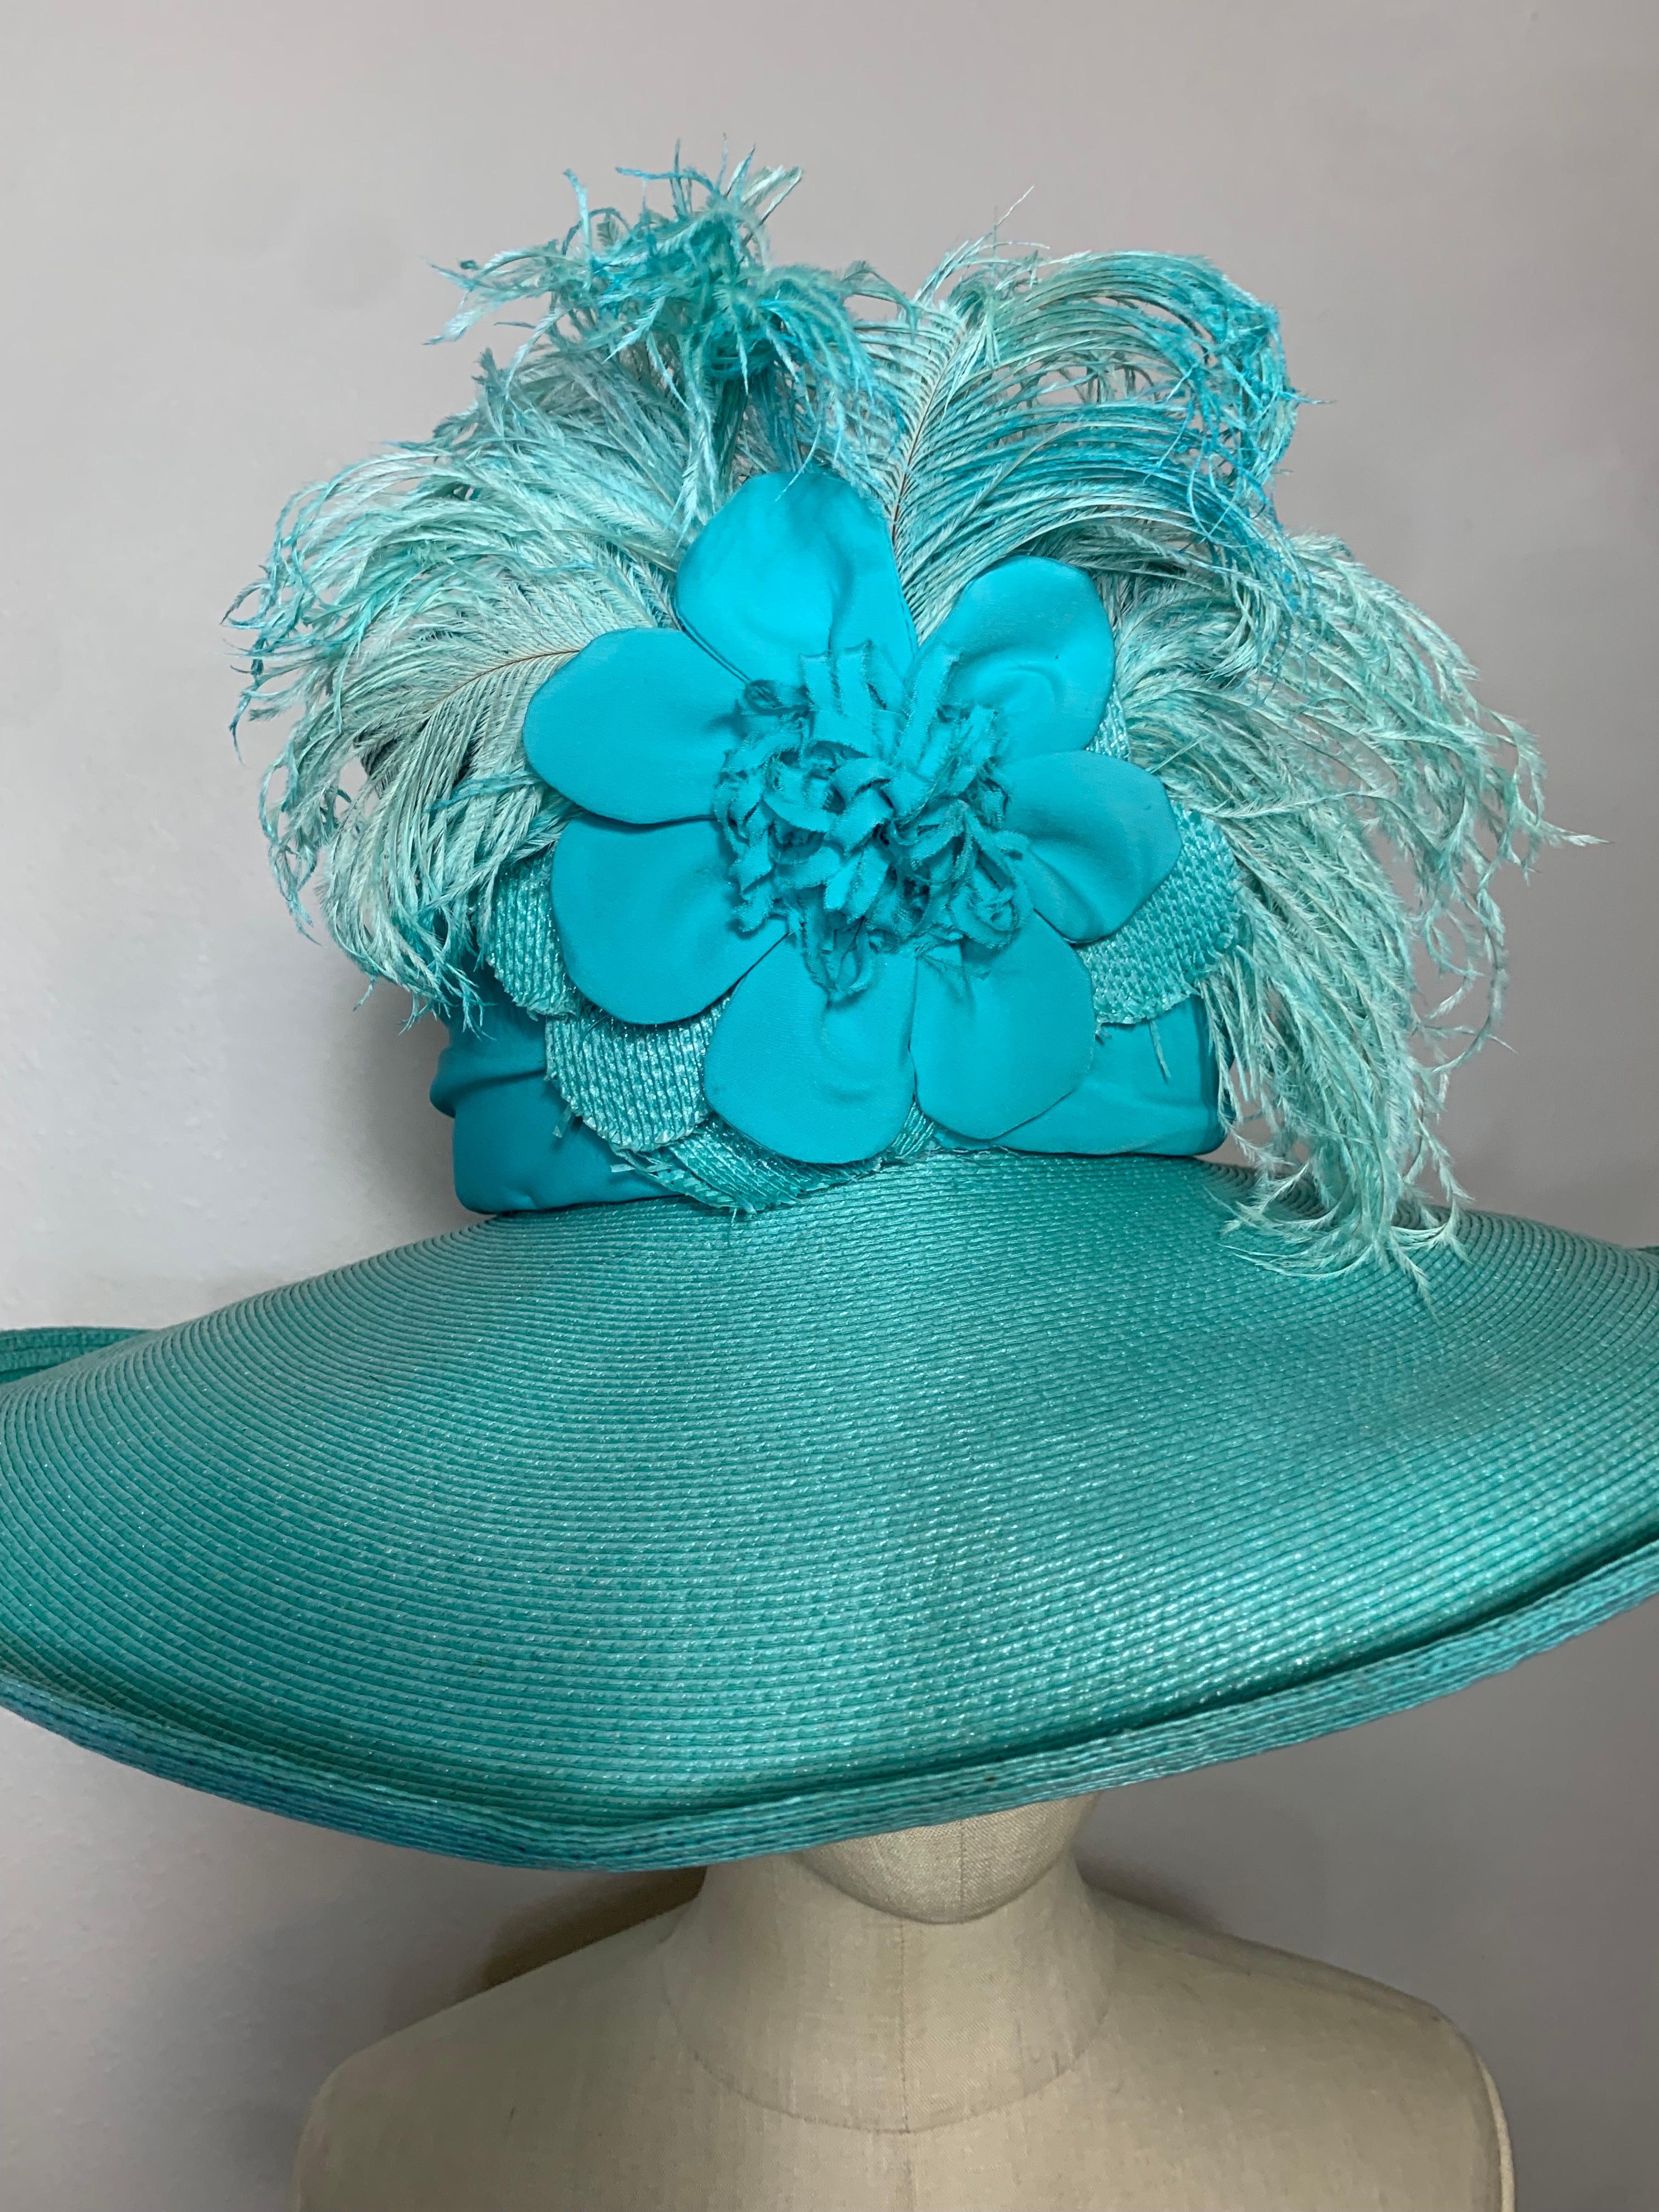 2005 Spring/Summer Maison Michel Aqua Milanese Straw Wide Brim Hat w Extravagant Feather & Floral Trim: Beautiful custom-made straw hat with high rounded crown, wide contrasting fabric band and multi-fabric floral and ostrich feather embellishments